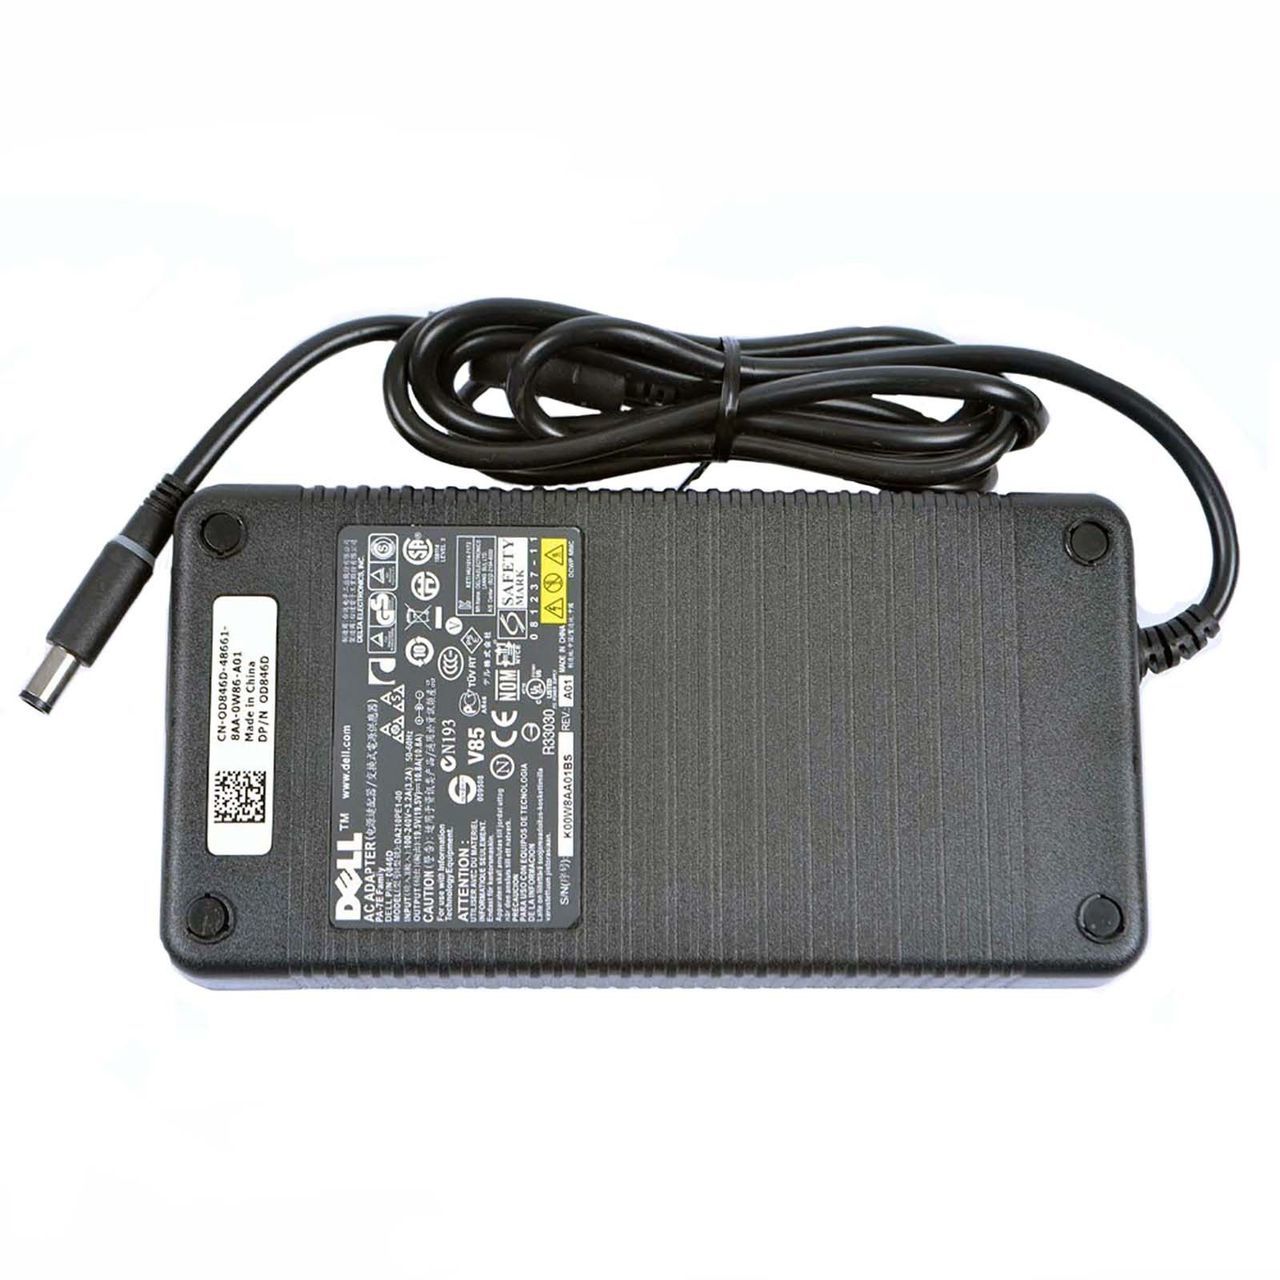 Dell Alienware 17 Area-51m (P38E) 17 R4 (P31E) 17 R5 (P31E) 18 (P19E) M18x (P12E) M18x R2 (P12E) Laptop Charger AC Adapter Power Cord 19.5V 16.9A - image 1 of 4